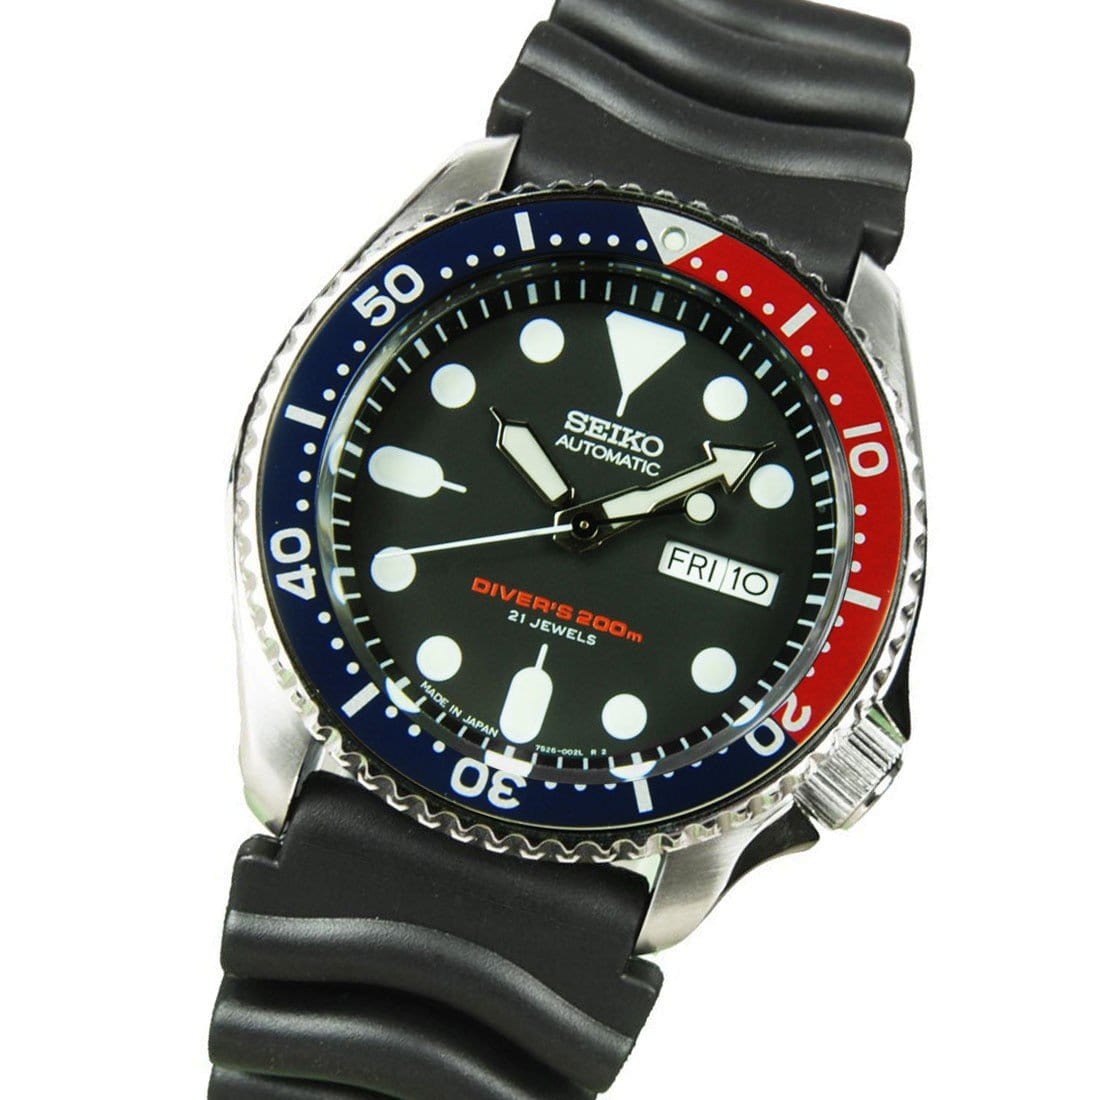 SKX009J SKX009J1 Seiko Automatic Japan Male Divers Watch with Extra Strap